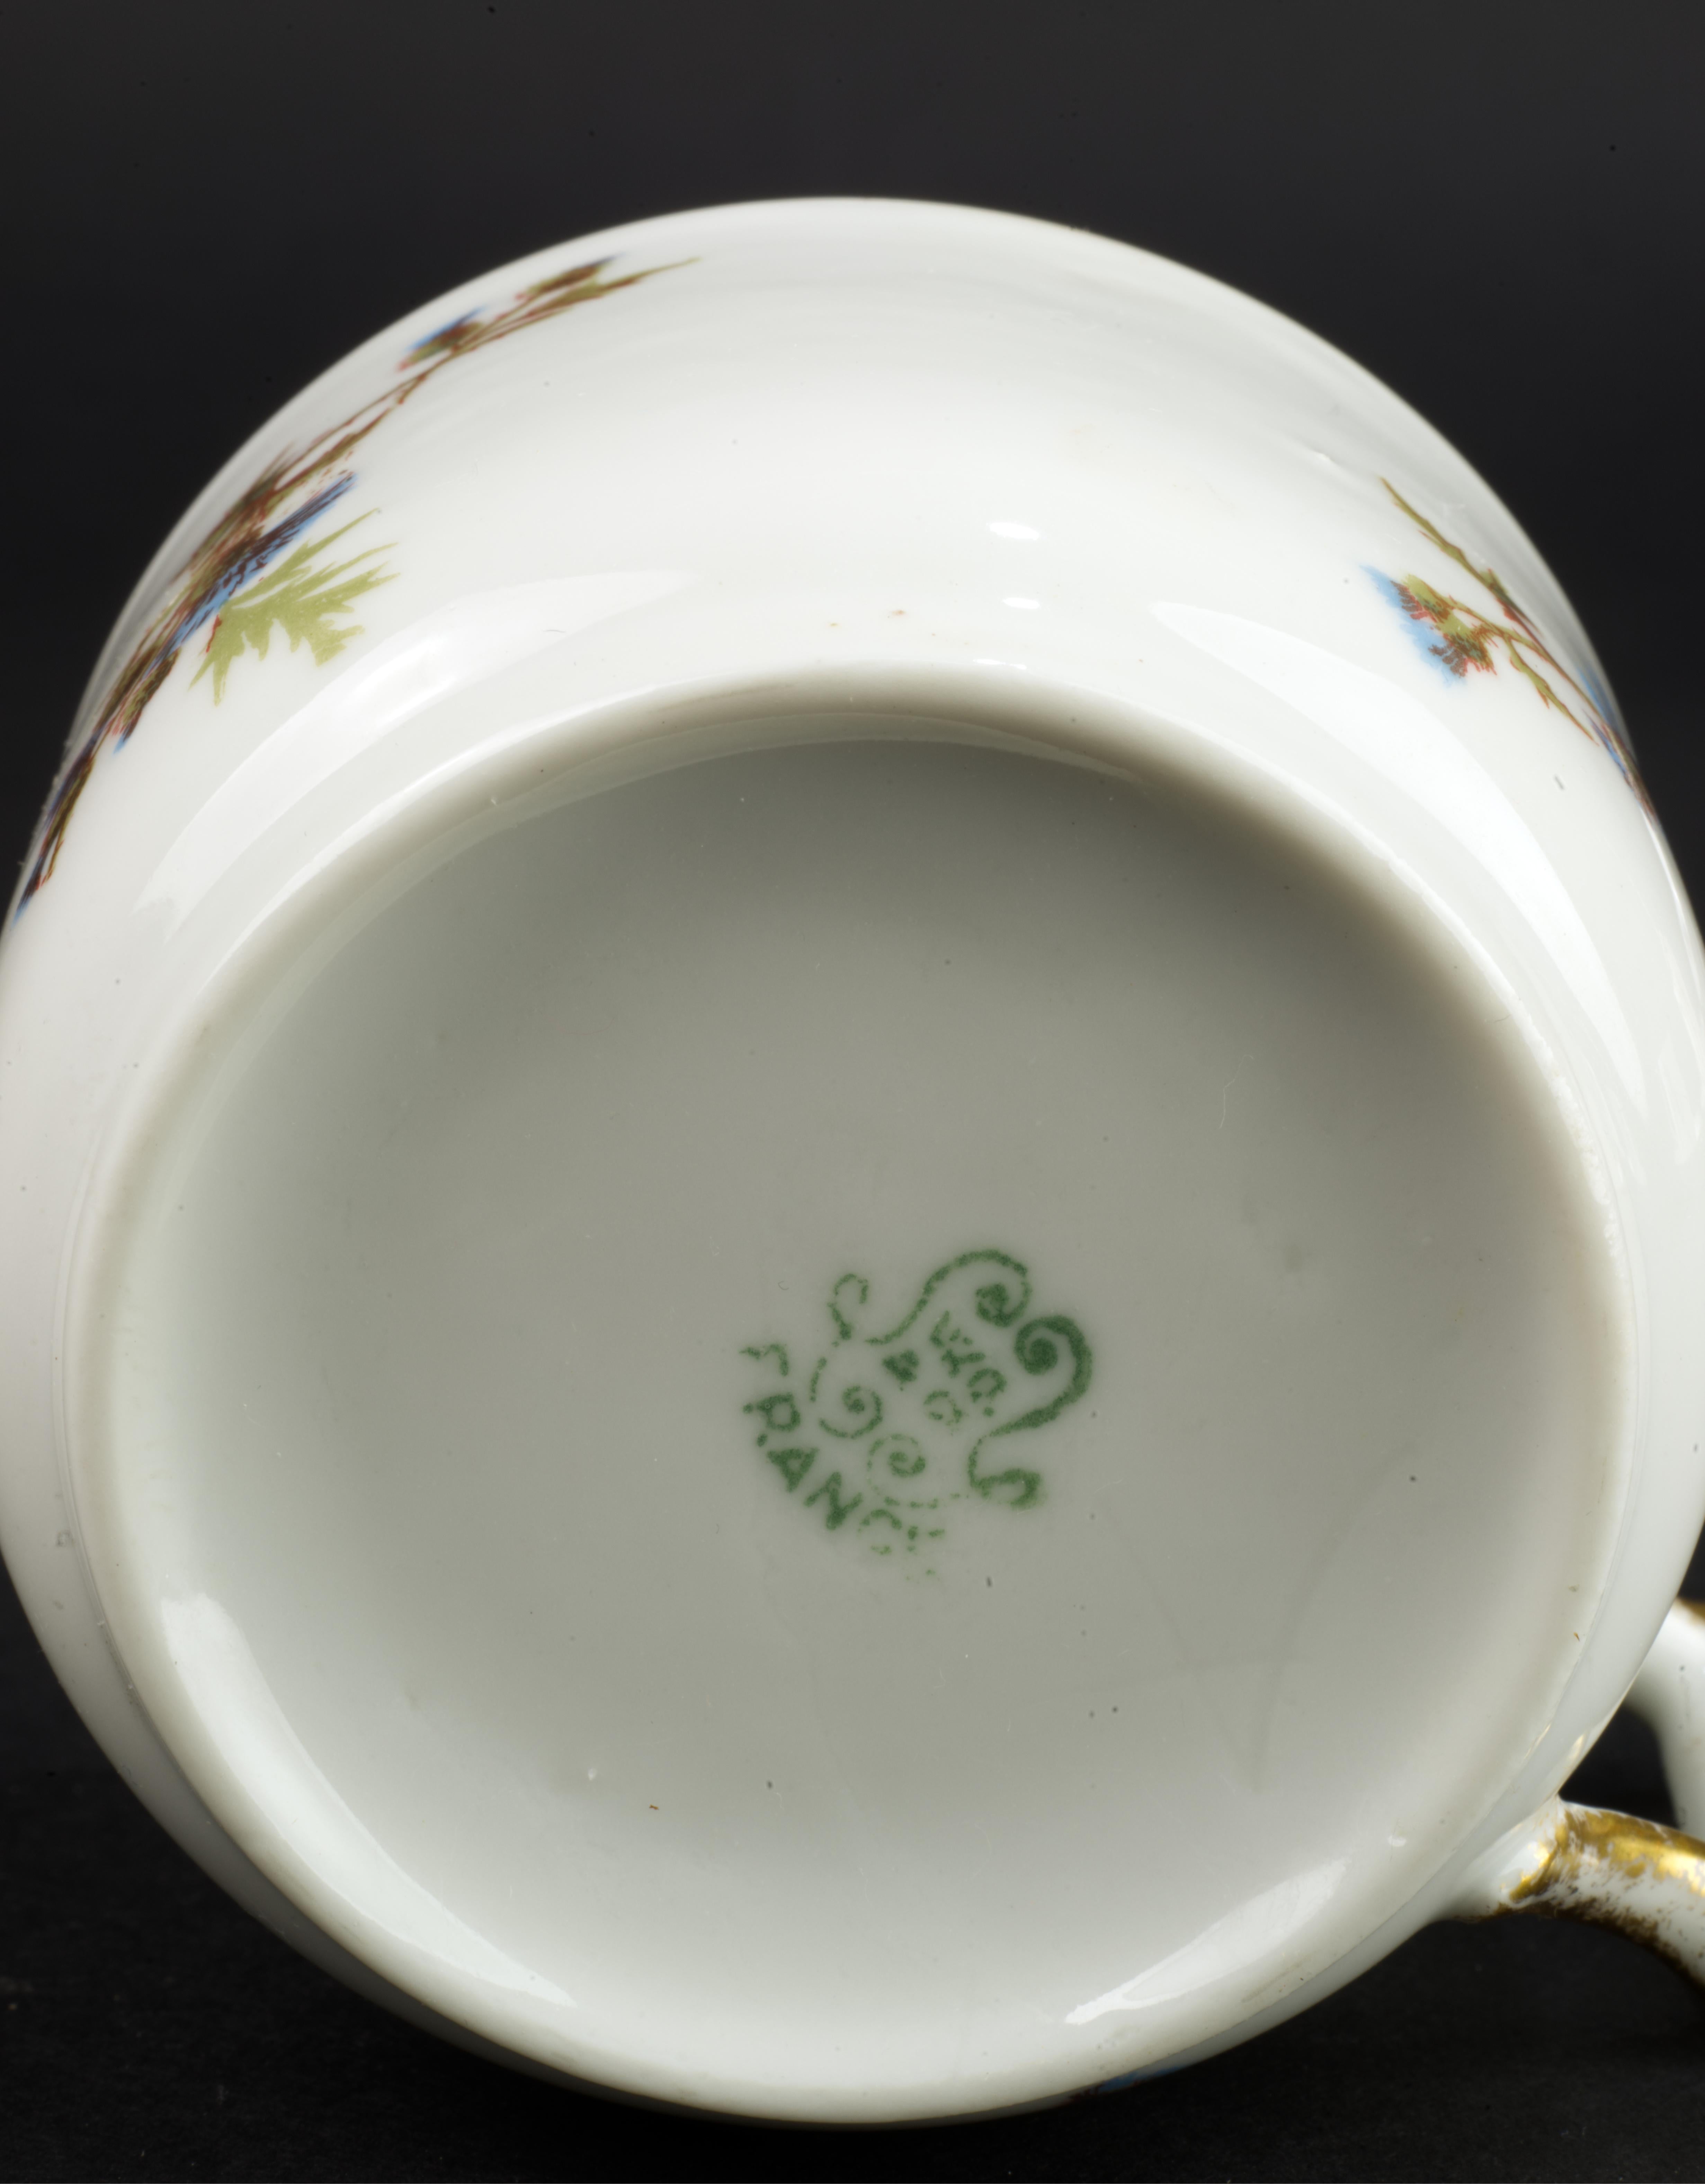 Guerin &Co Limoges France Set of 3 Cups and Saucers Bone China, 1891-1900 For Sale 5